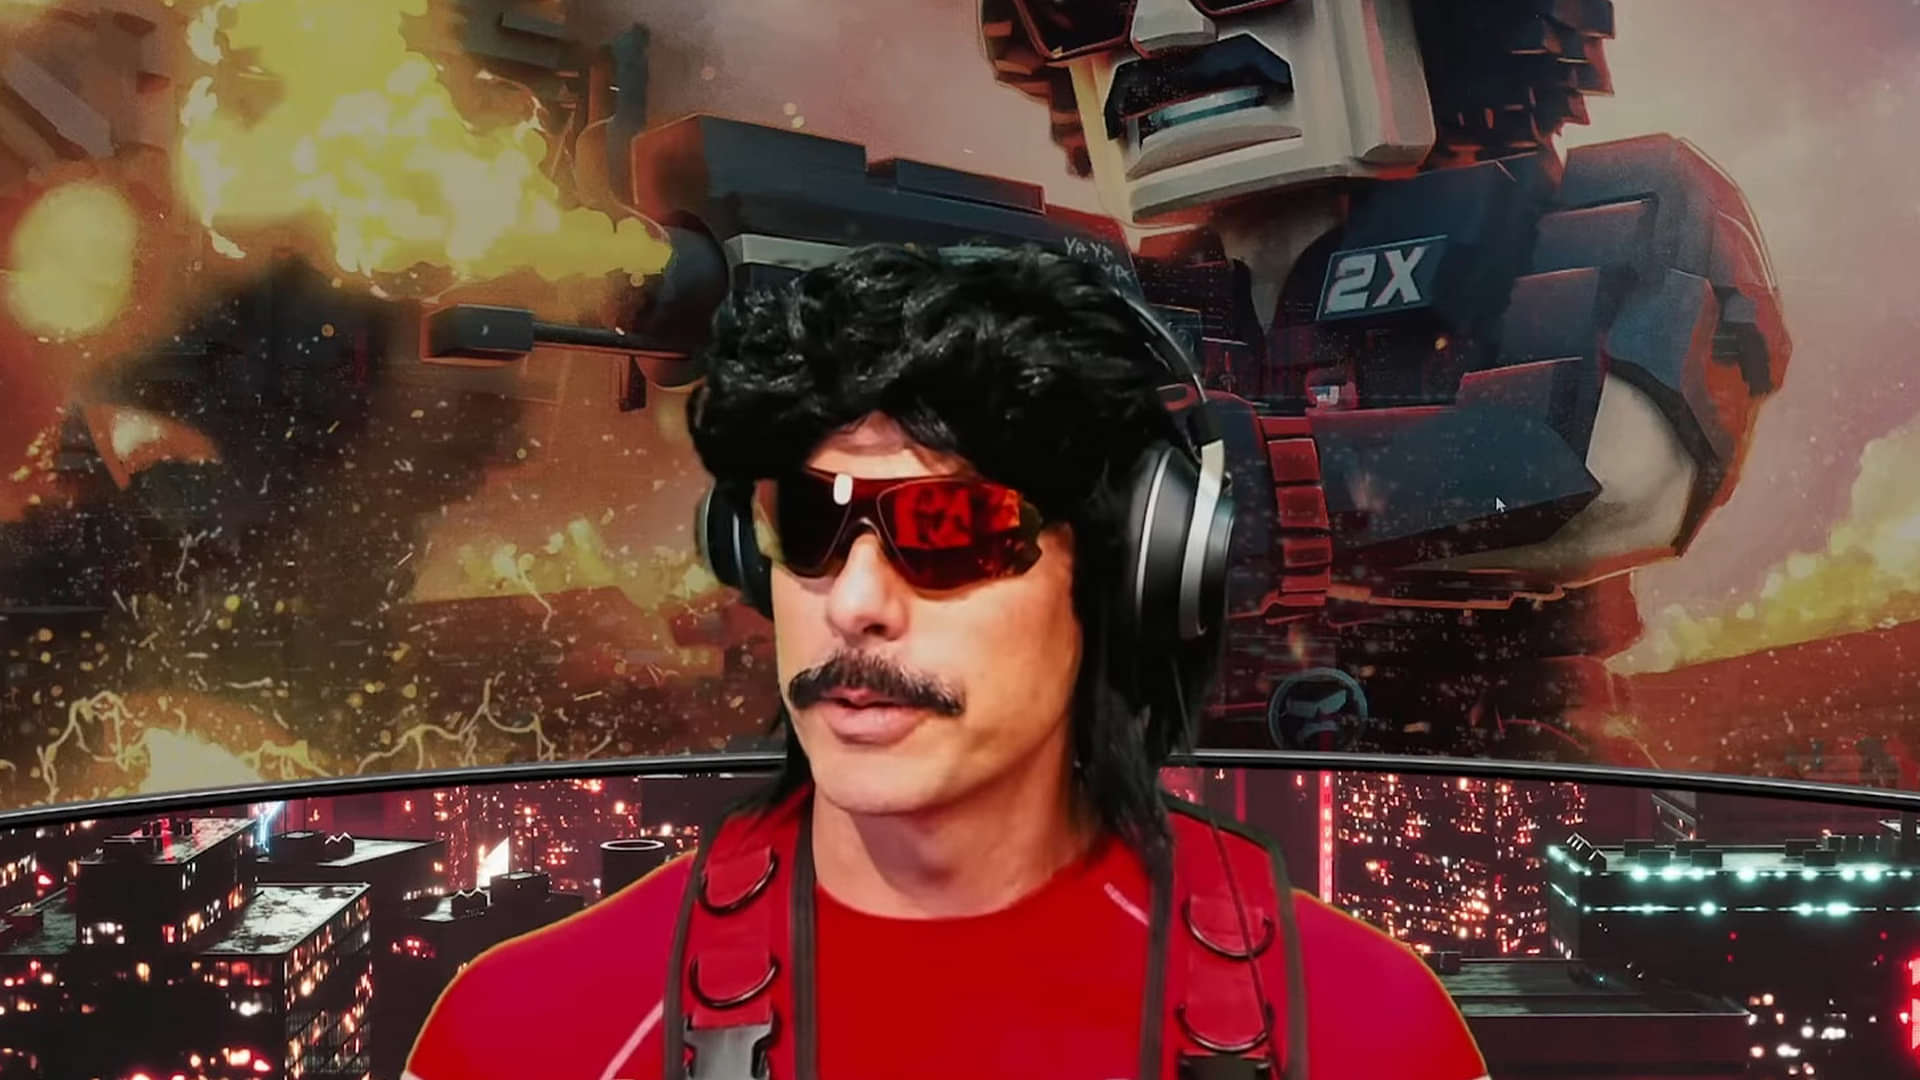 Dr Disrespect thinks Battlefield V's Firestorm needs to learn one